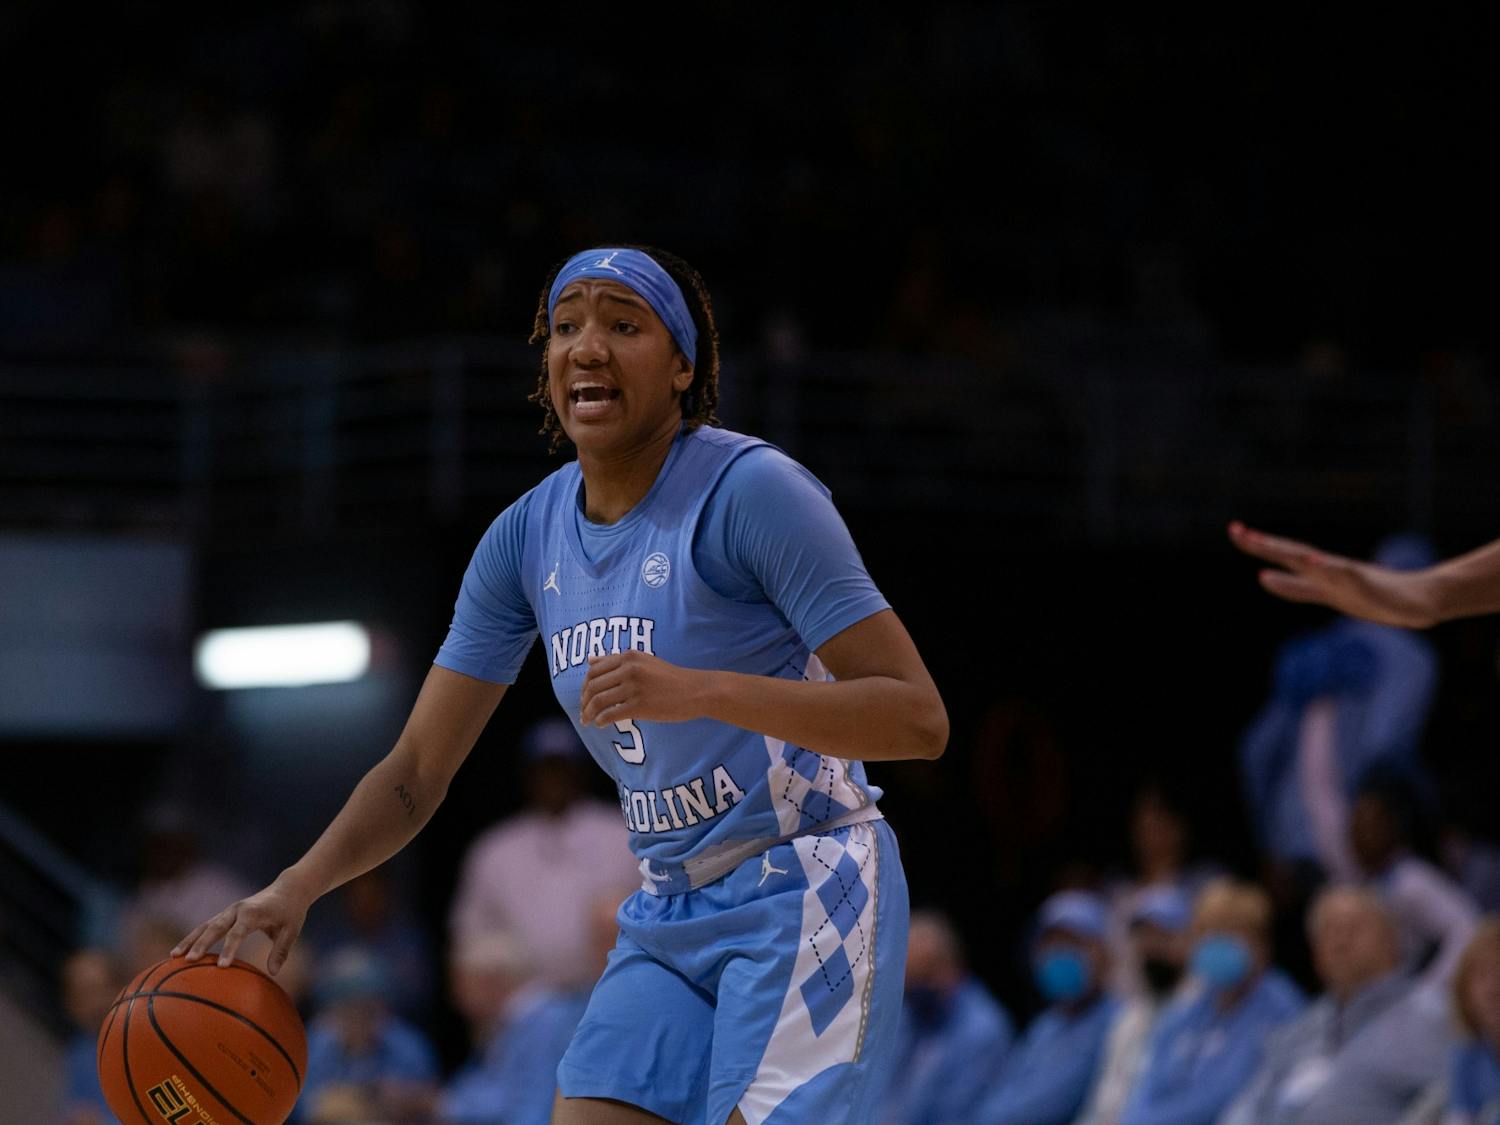 UNC junior guard Kennedy Todd-Williams (3) communicating with her teammates during the women's basketball game against the NC State Wolfpack in Carmichael Arena on Sunday, Jan. 15, 2023.